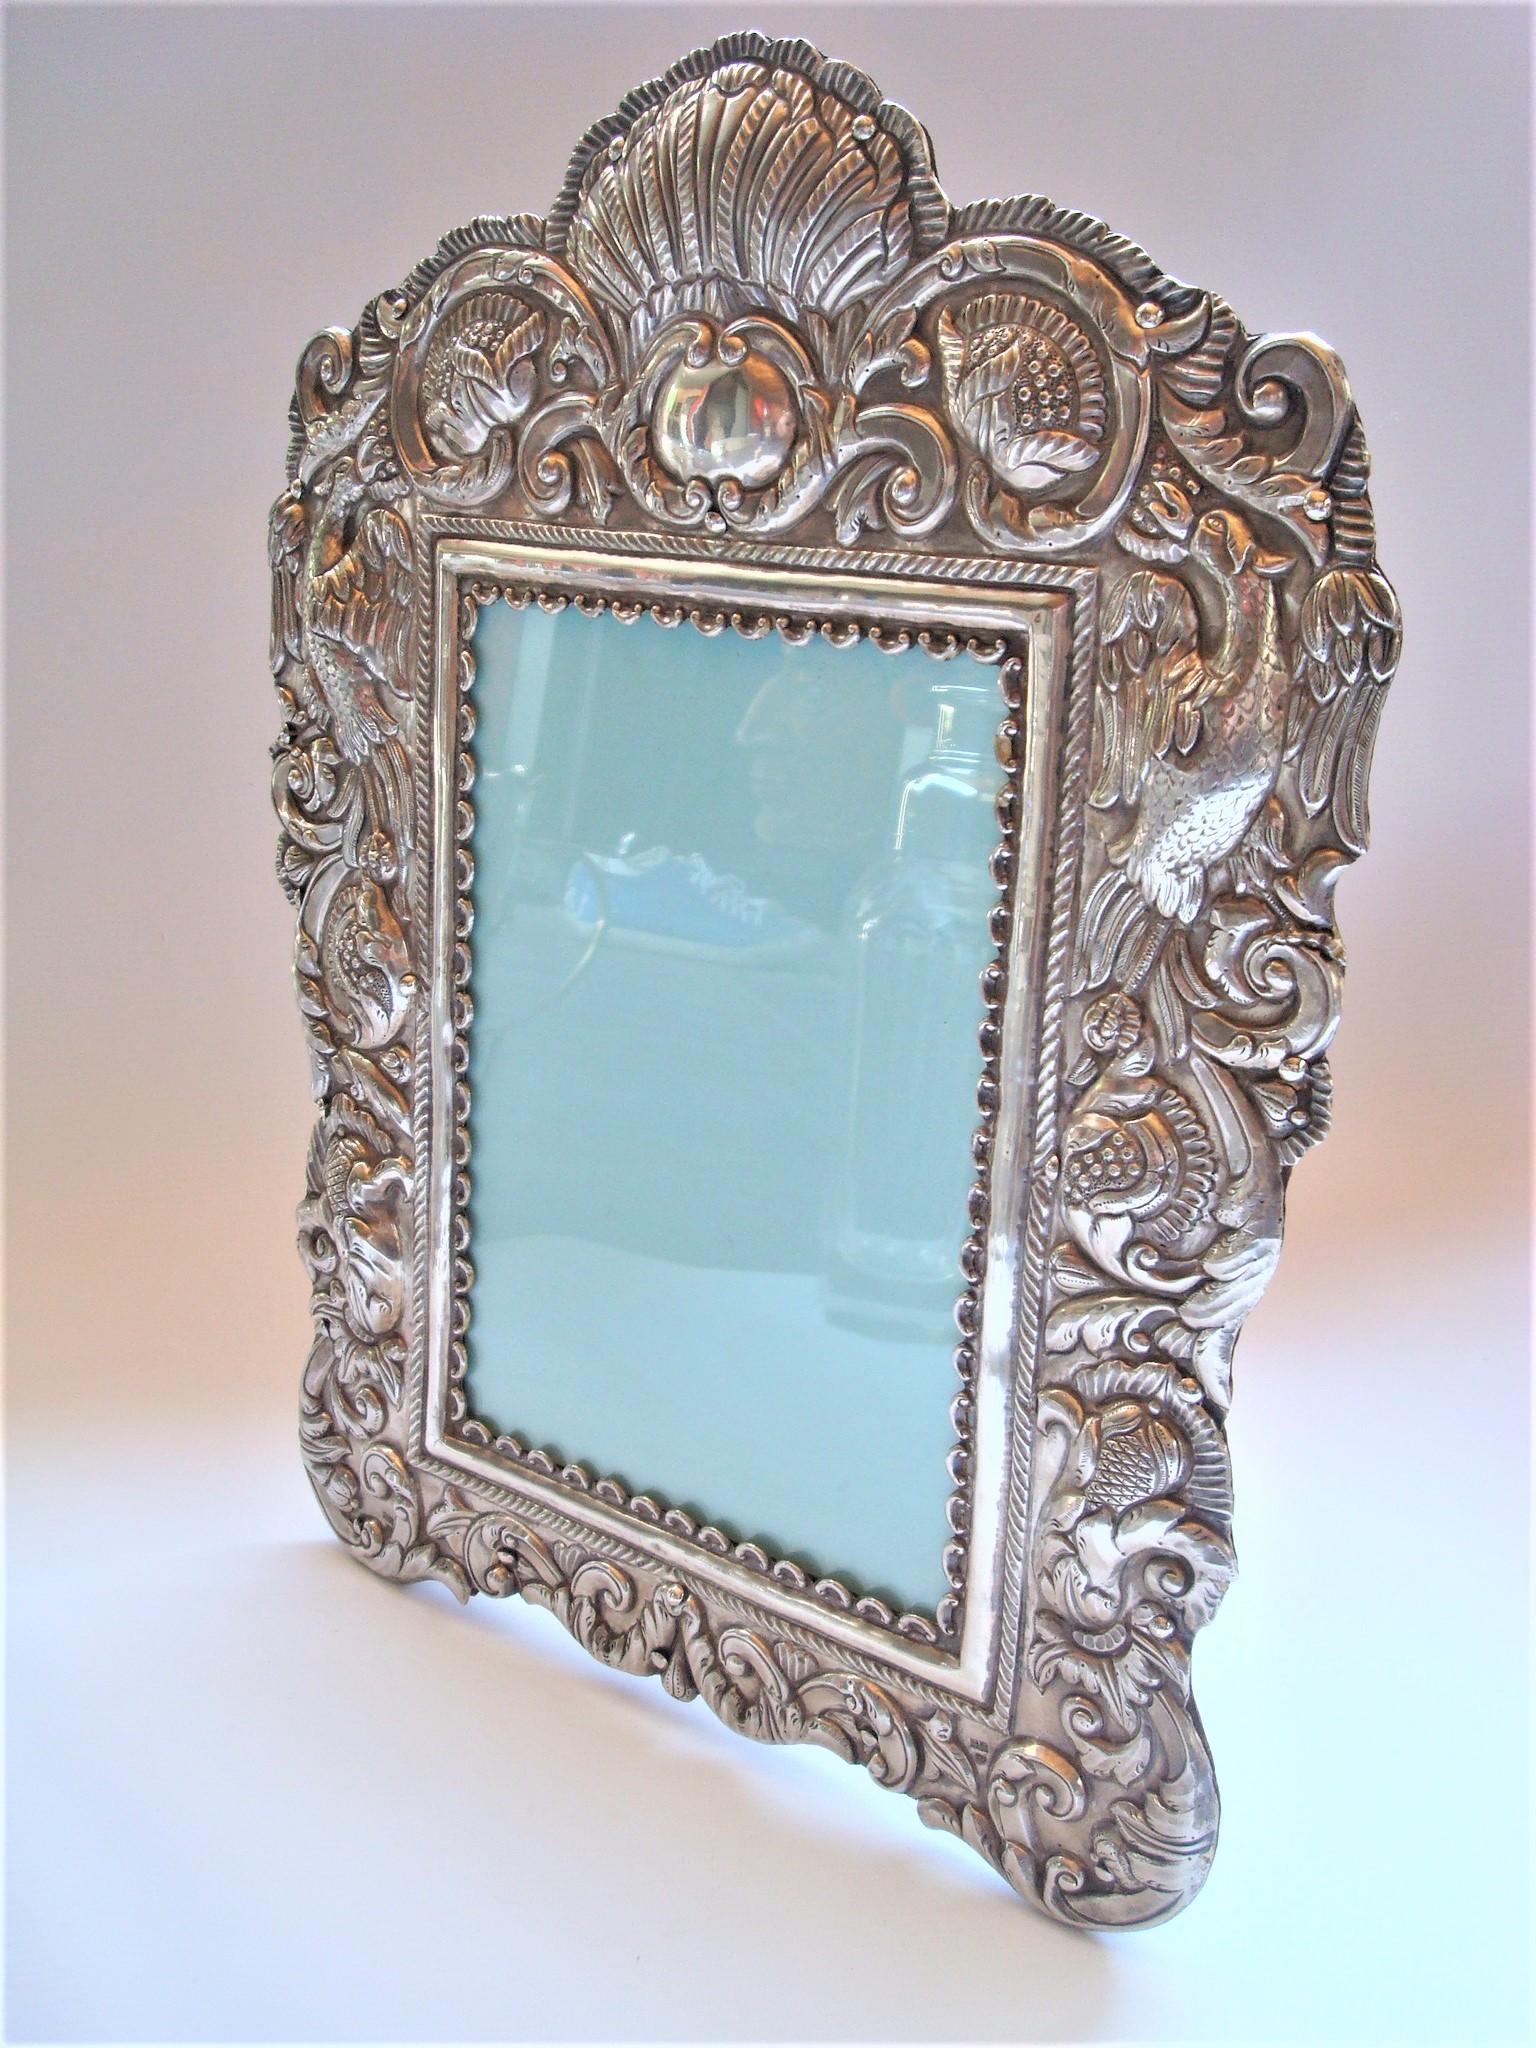 South American sterling silver hand made / Embossed picture frame / mirror 1940´s. Marked hand-made and 925 (it´s the sterling mark in south america).
Perfect for any Mexican Style house.
As for the size it has, it can be used as a picture frame,